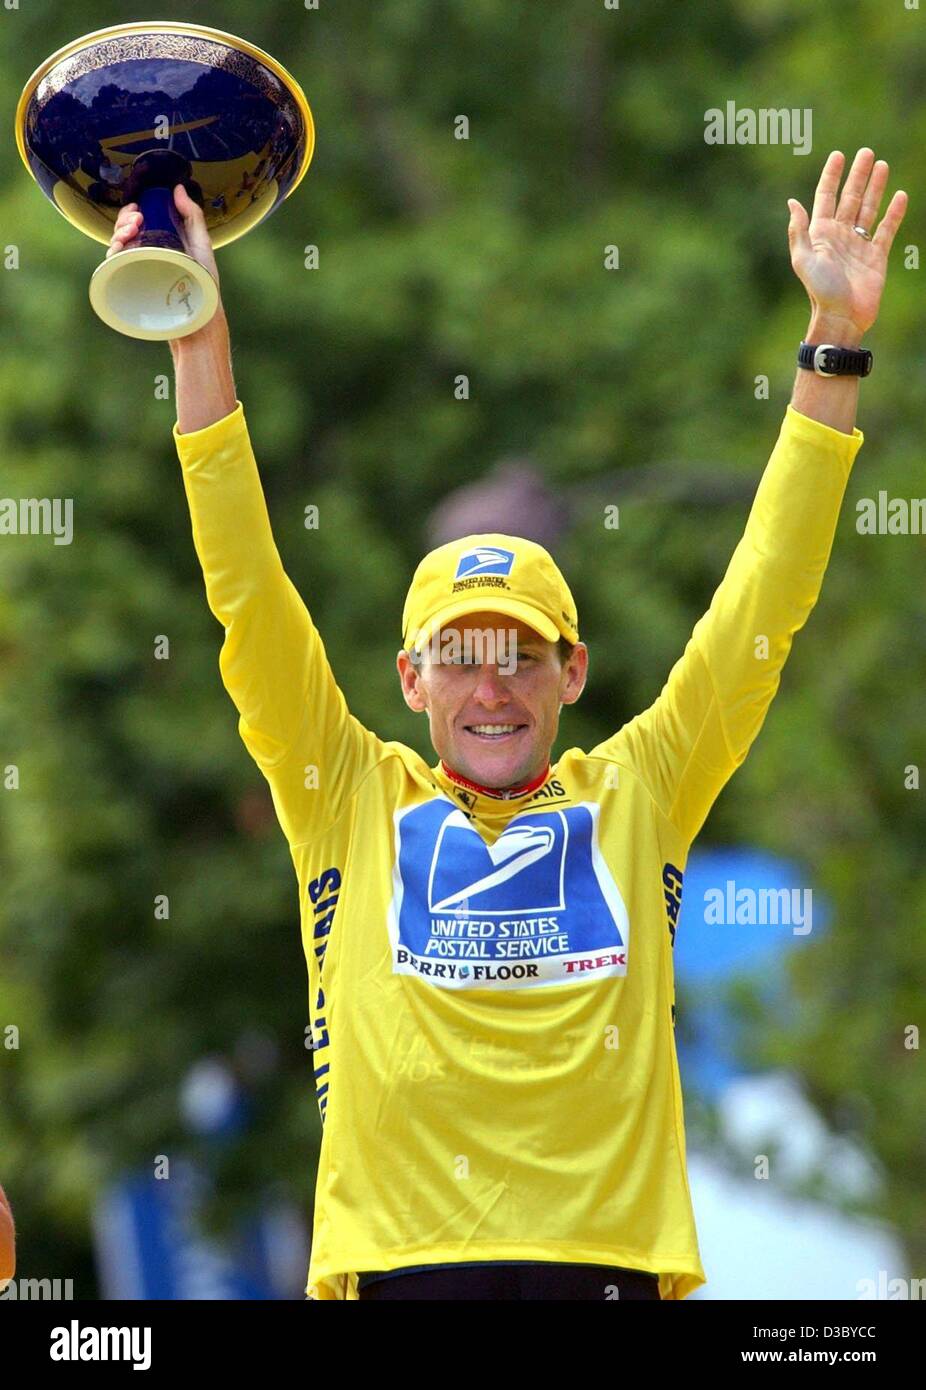 (dpa) - US Postal-Berry Floor's Lance Armstrong from the US, wearing the overall leader's yellow jersey, holds up the Tour de France 100th anniversary cup as he poses on the podium after the 20th stage of the 2003 Tour de France cycling race, in Paris, 27 July 2003. Armstrong became the second rider Stock Photo